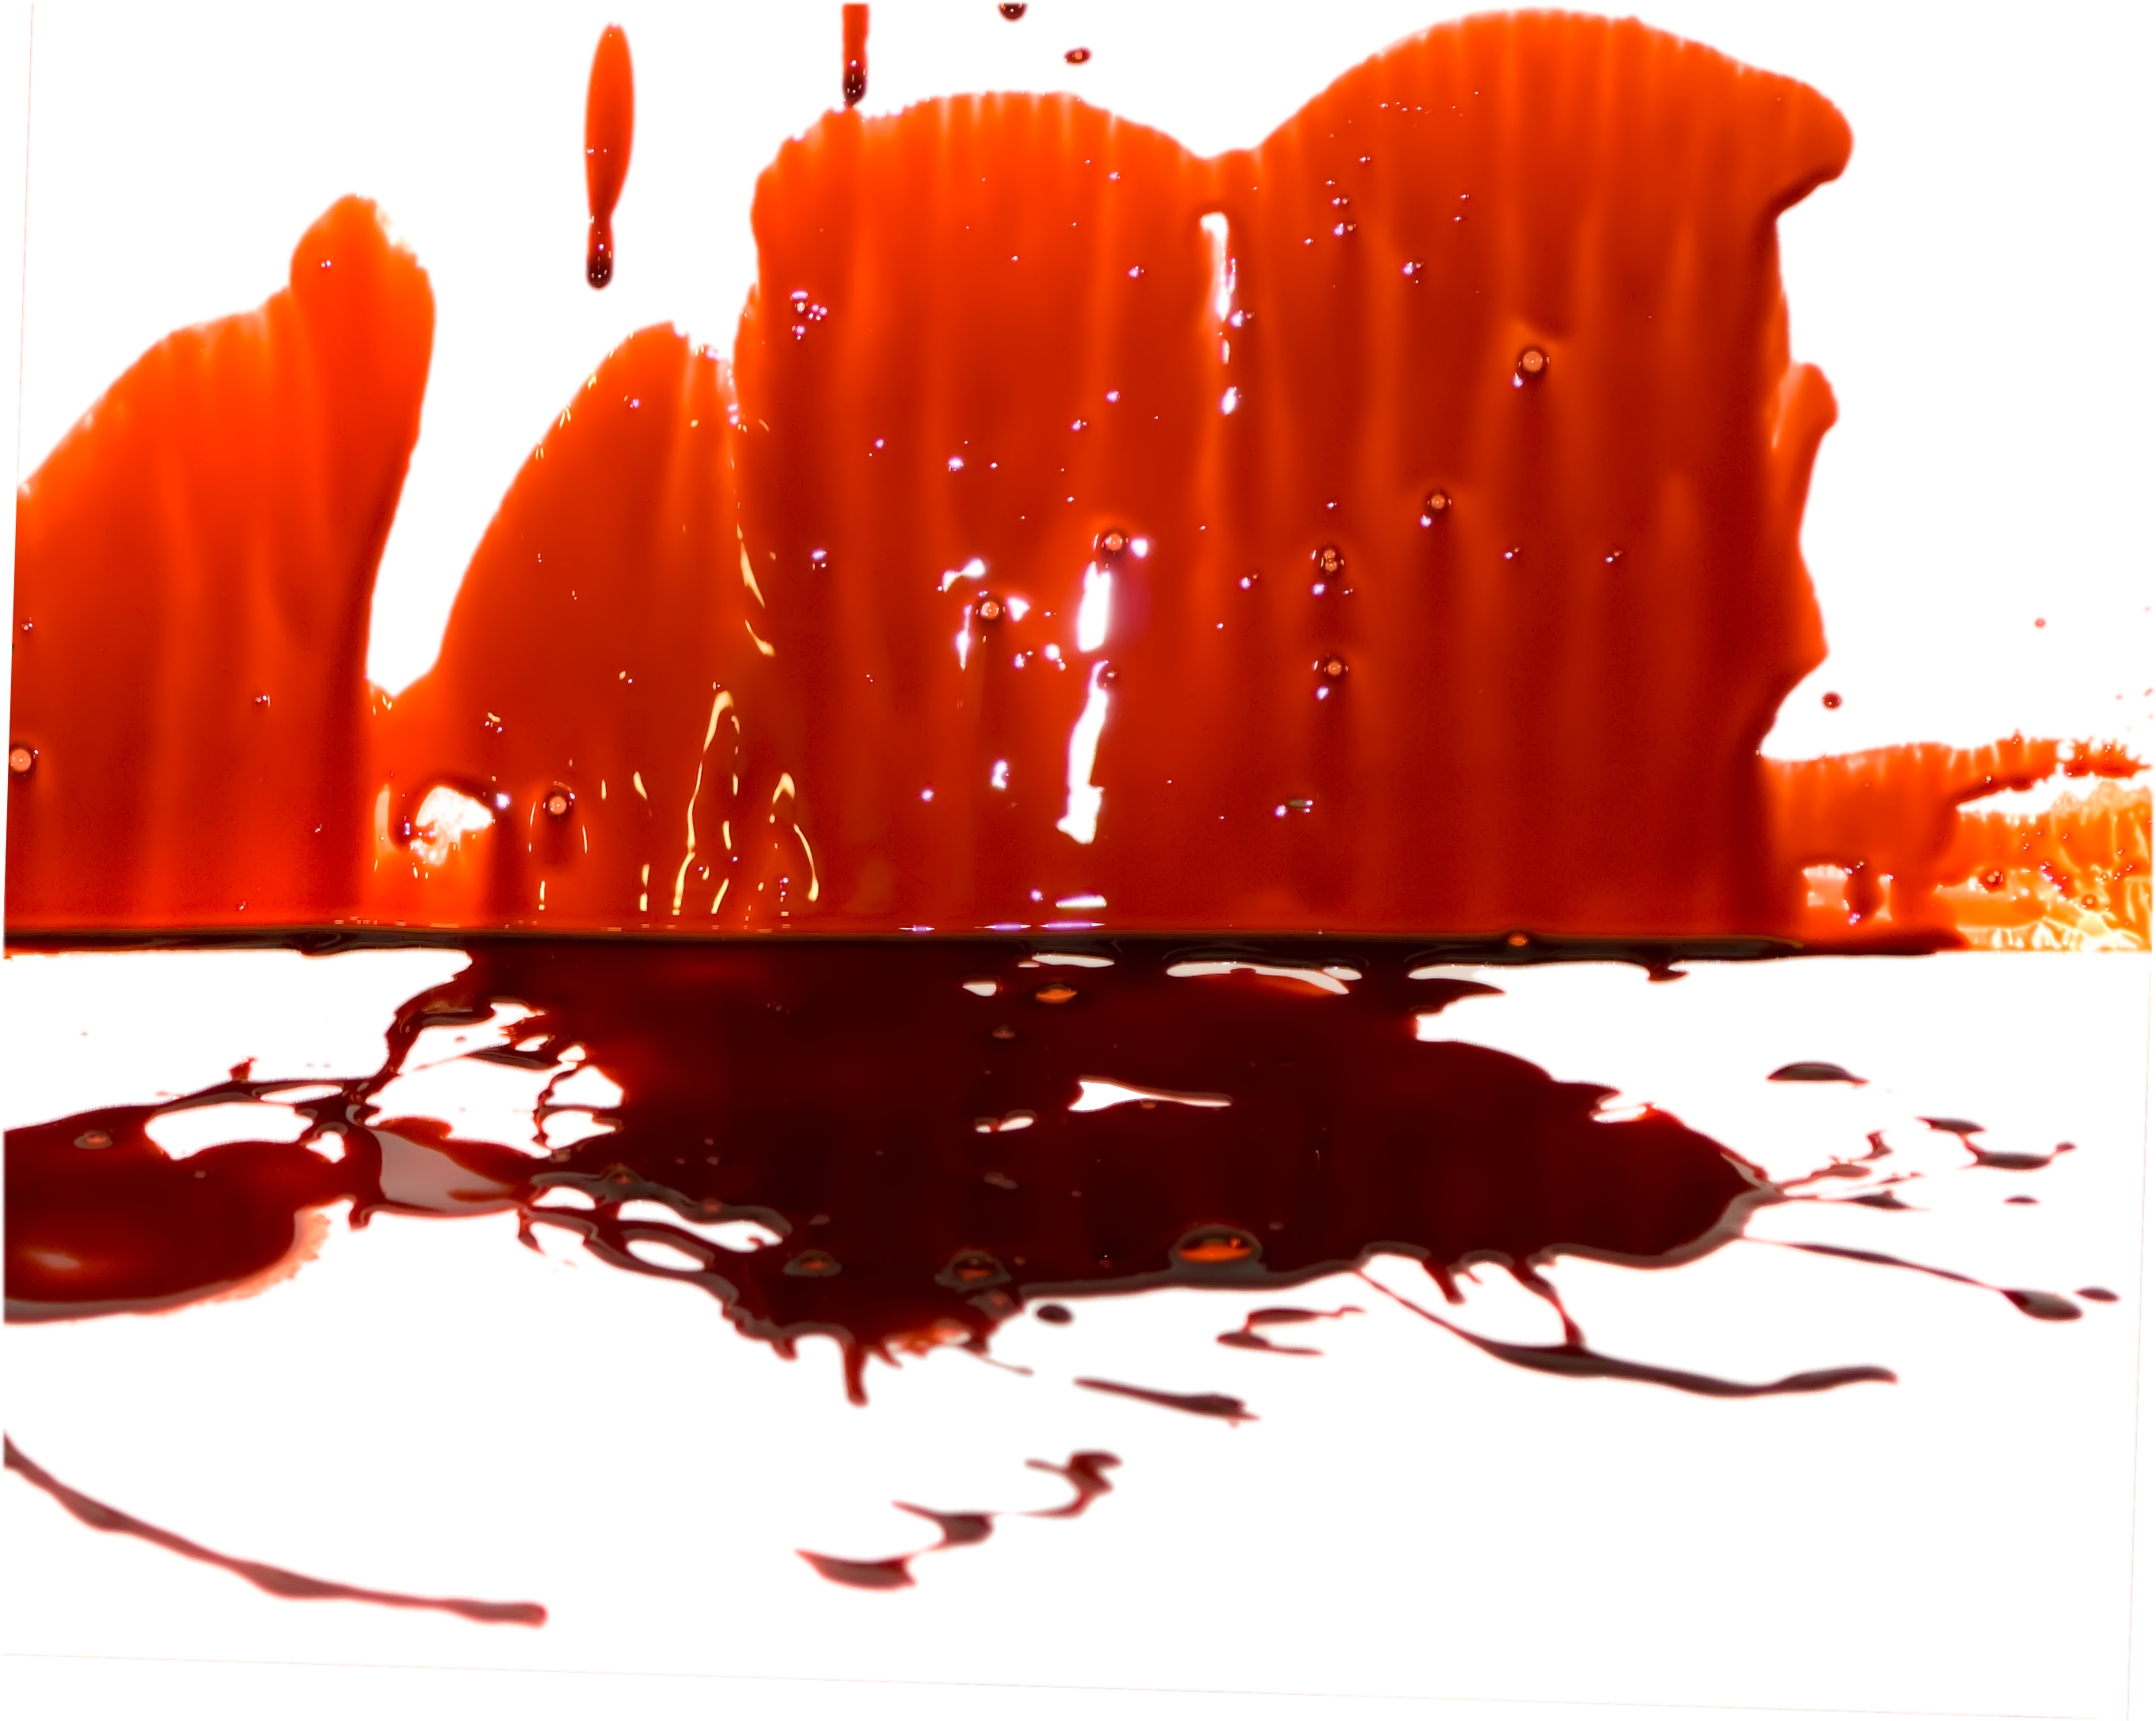 Blood puddle png. Images free download splashes